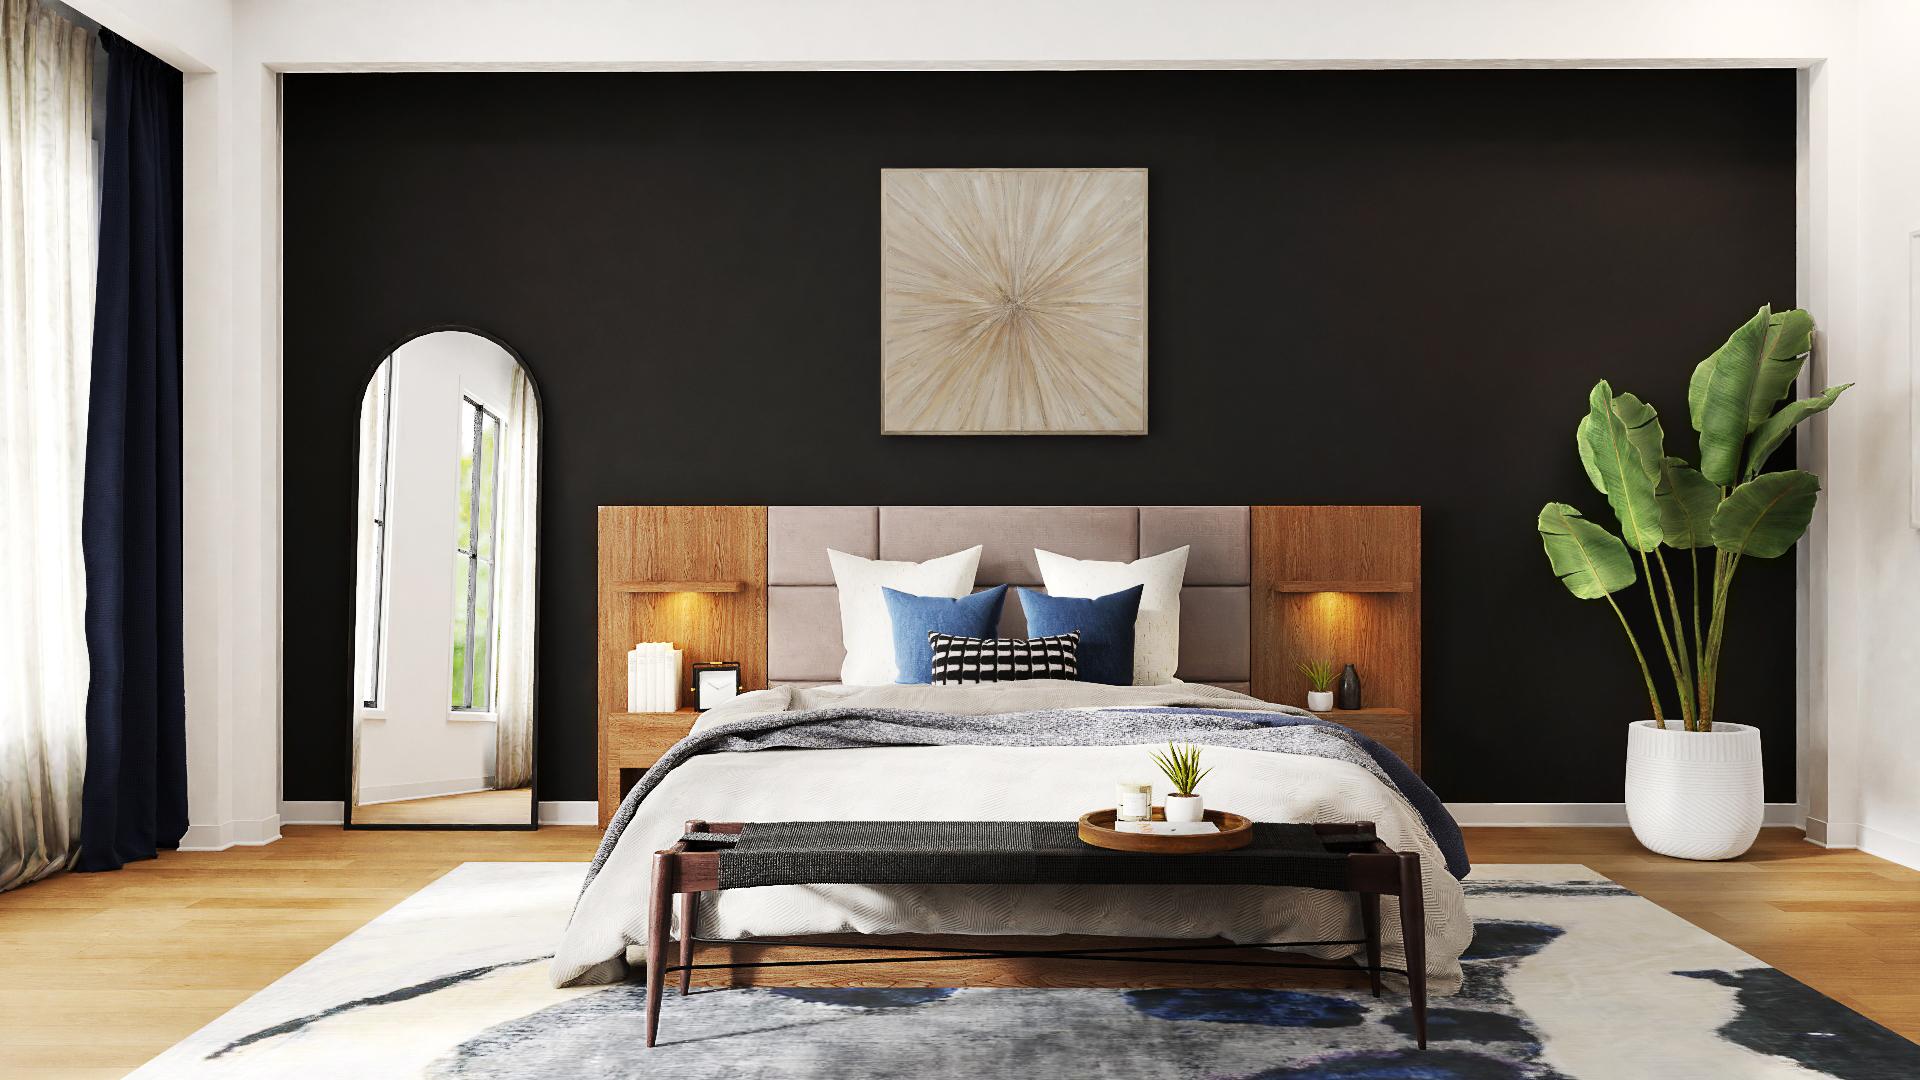 Modern Industrial Bedroom Design With Black Accent Wall